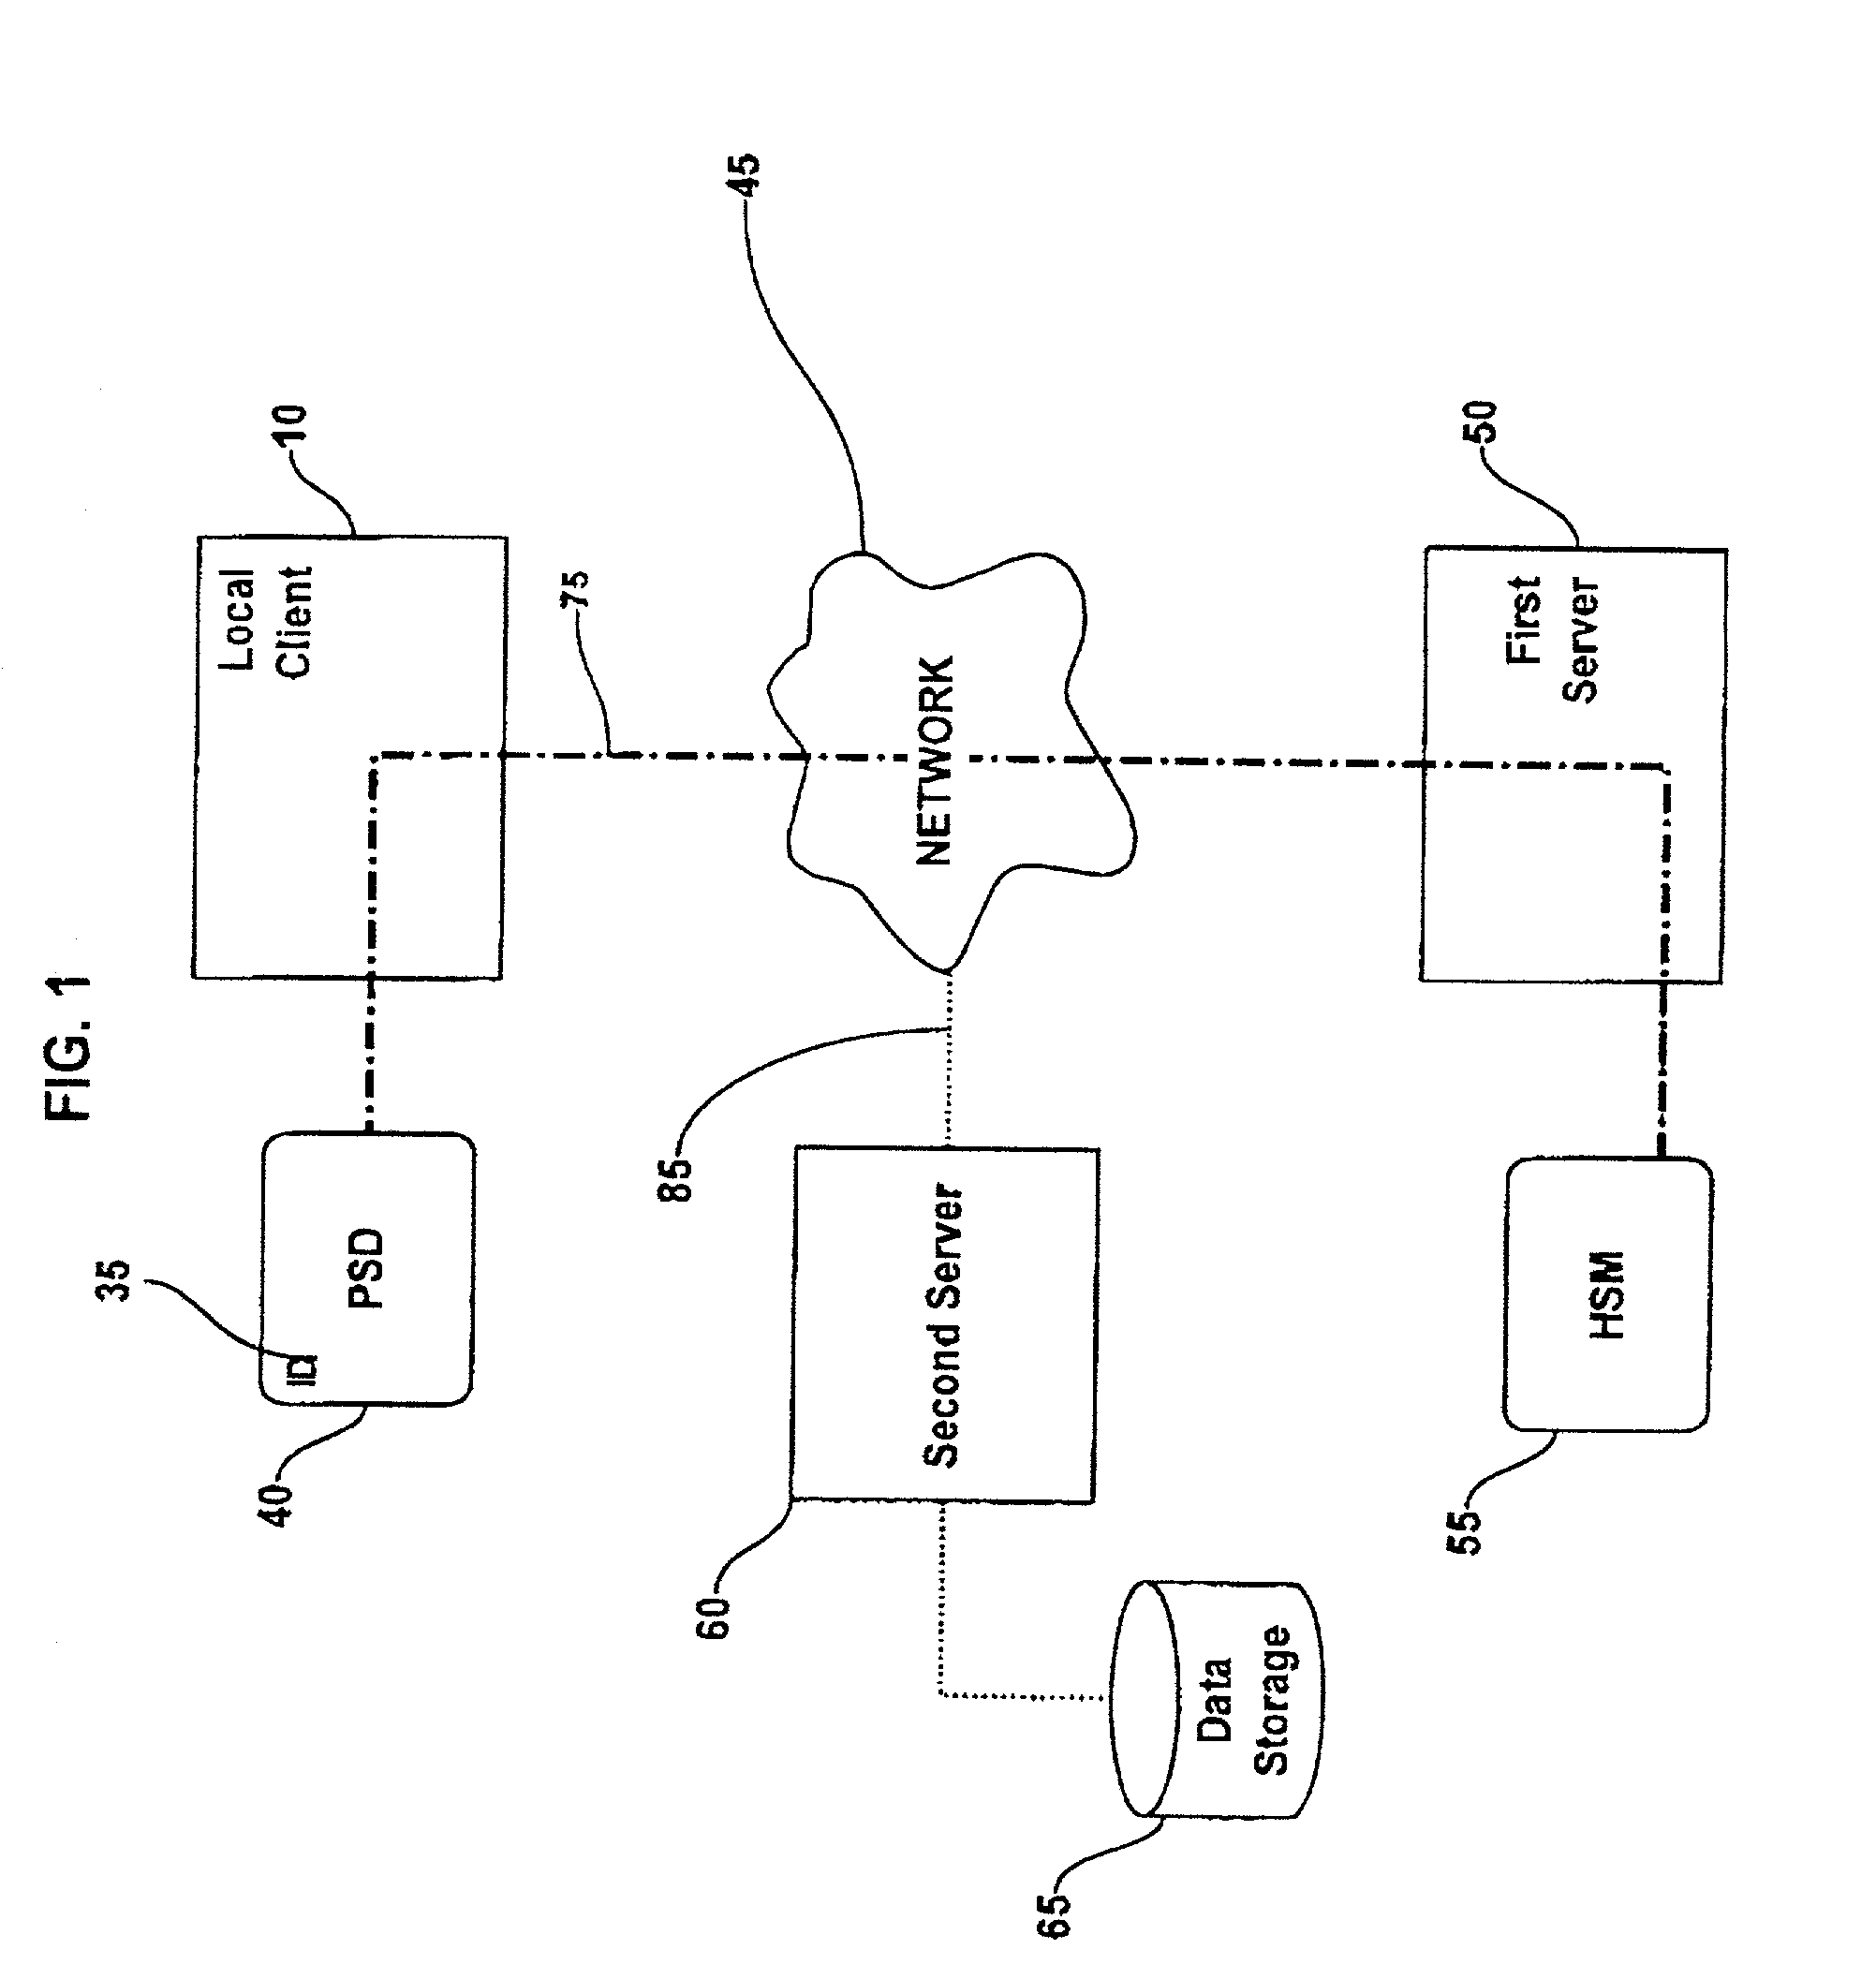 Method and system for performing post issuance configuration and data changes to a personal security device using a communications pipe